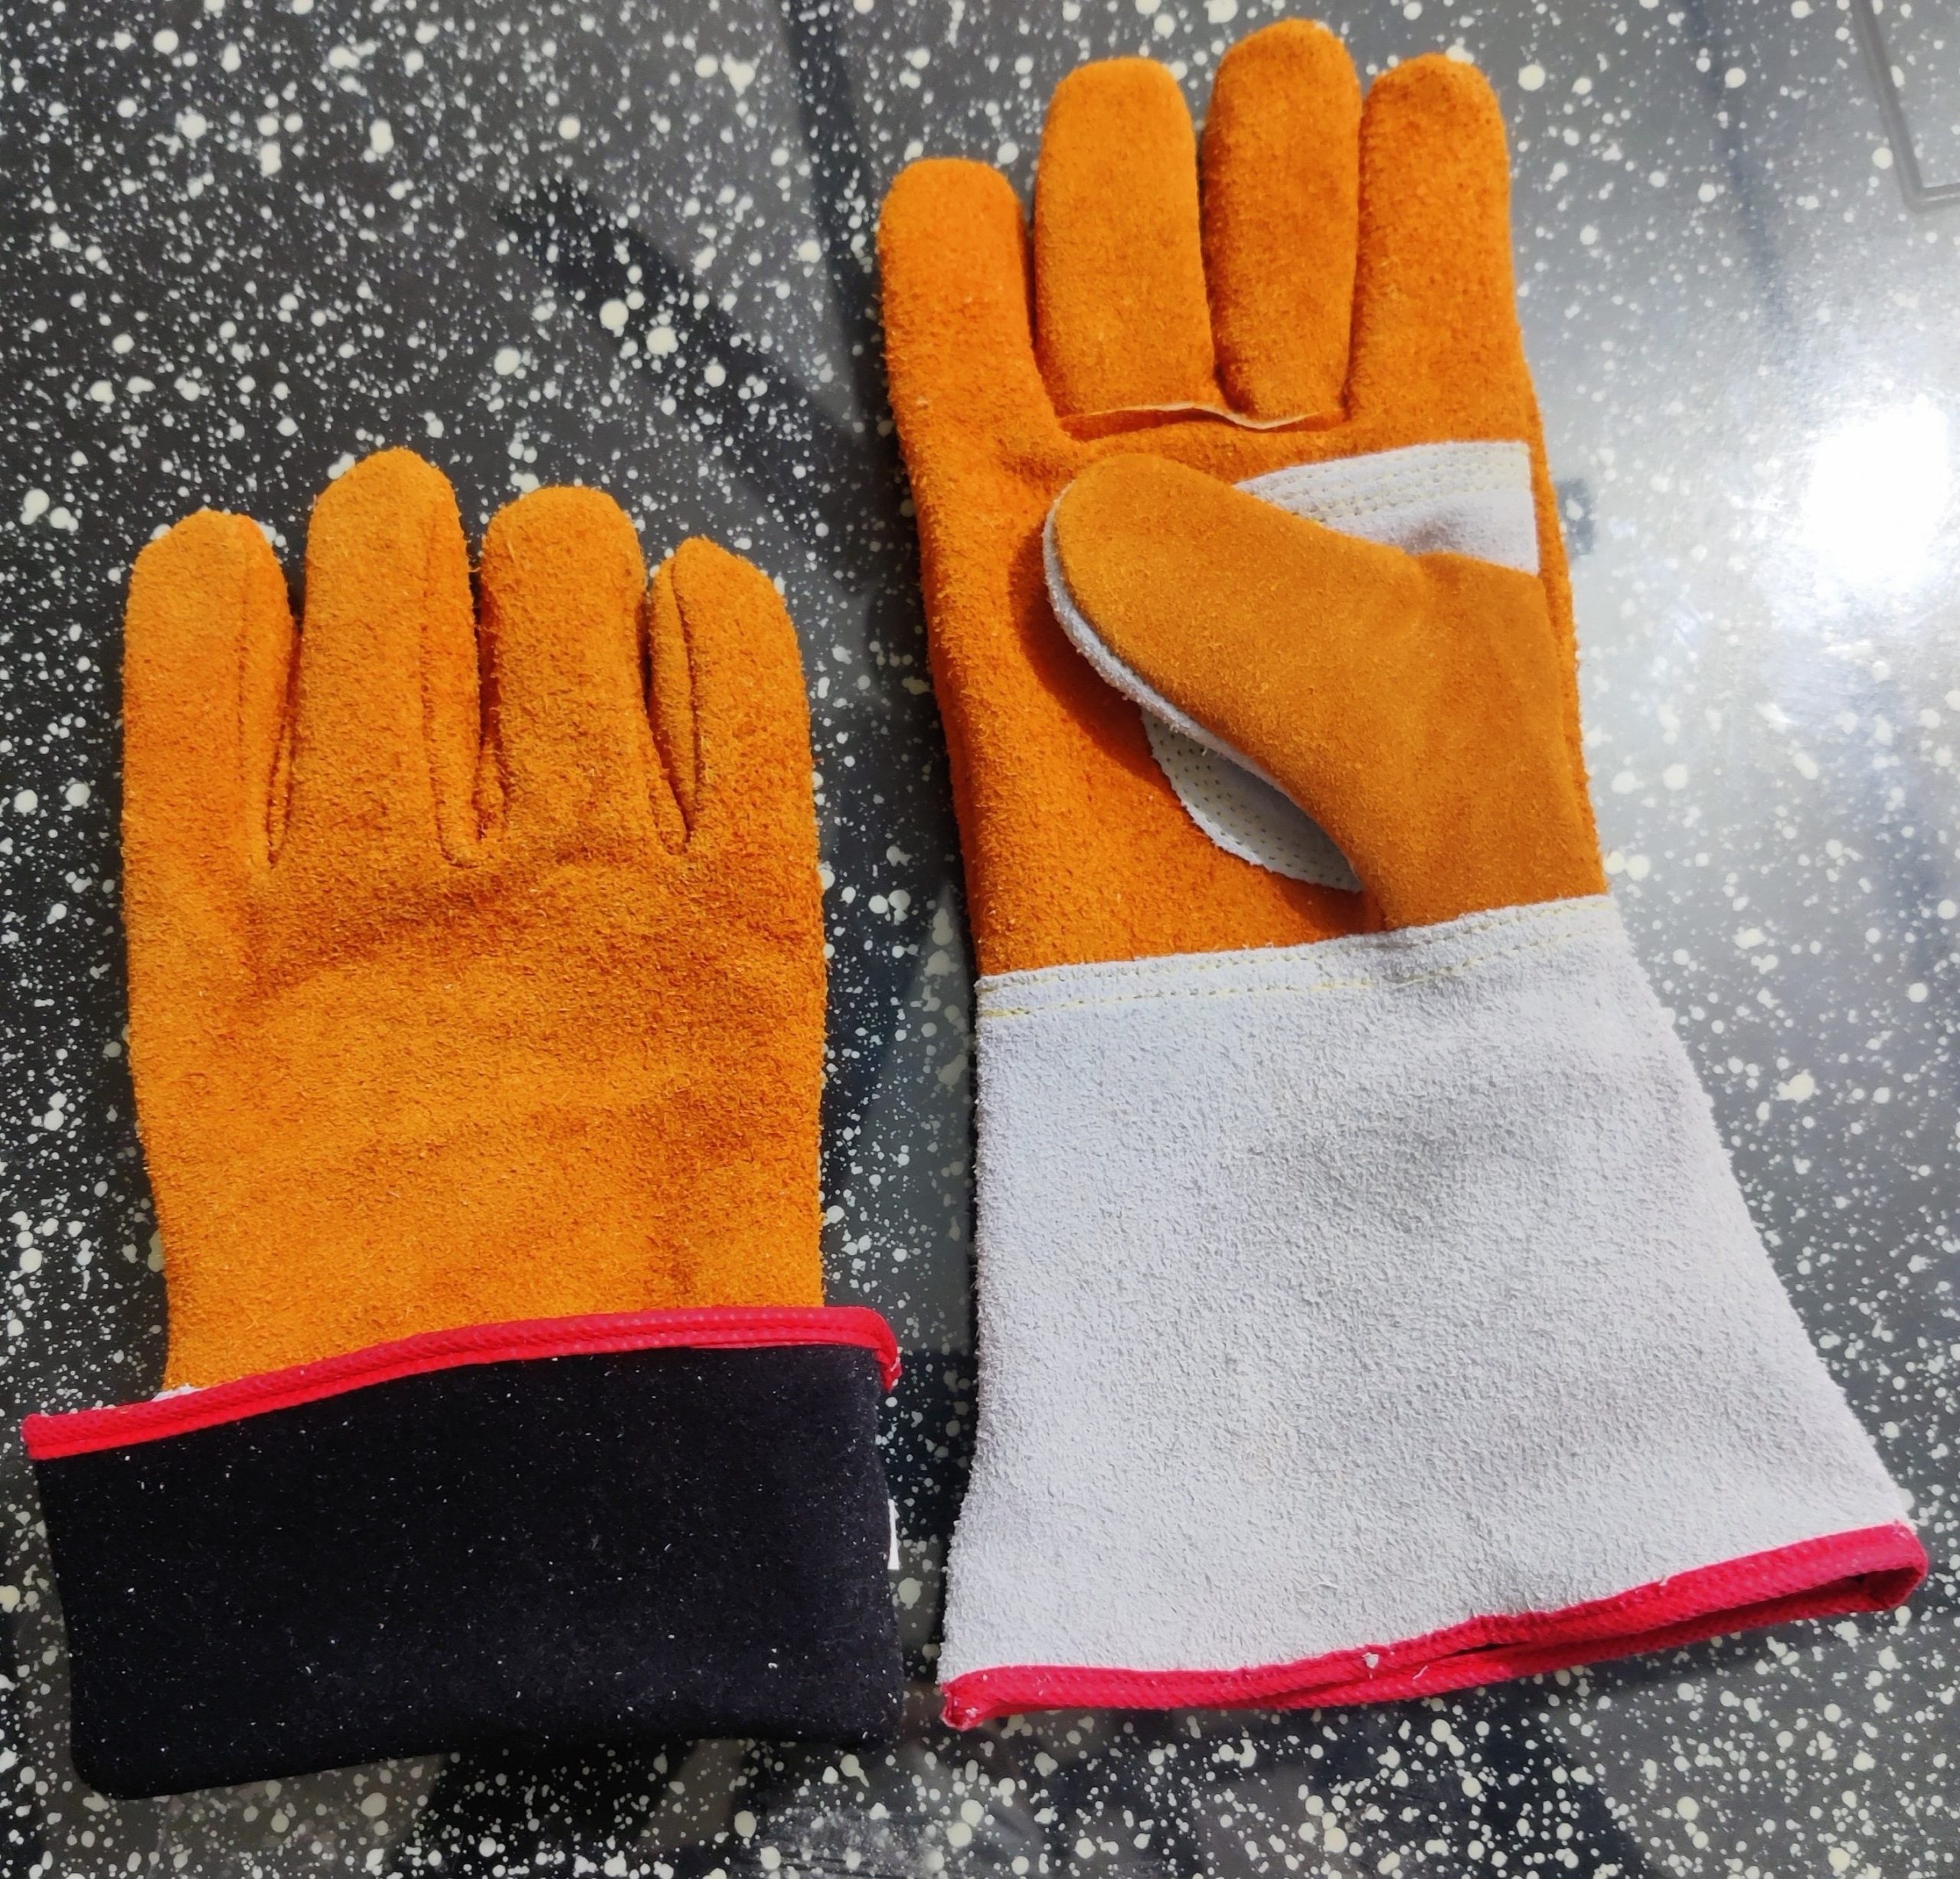 Split leather work gloves with cotton back lining